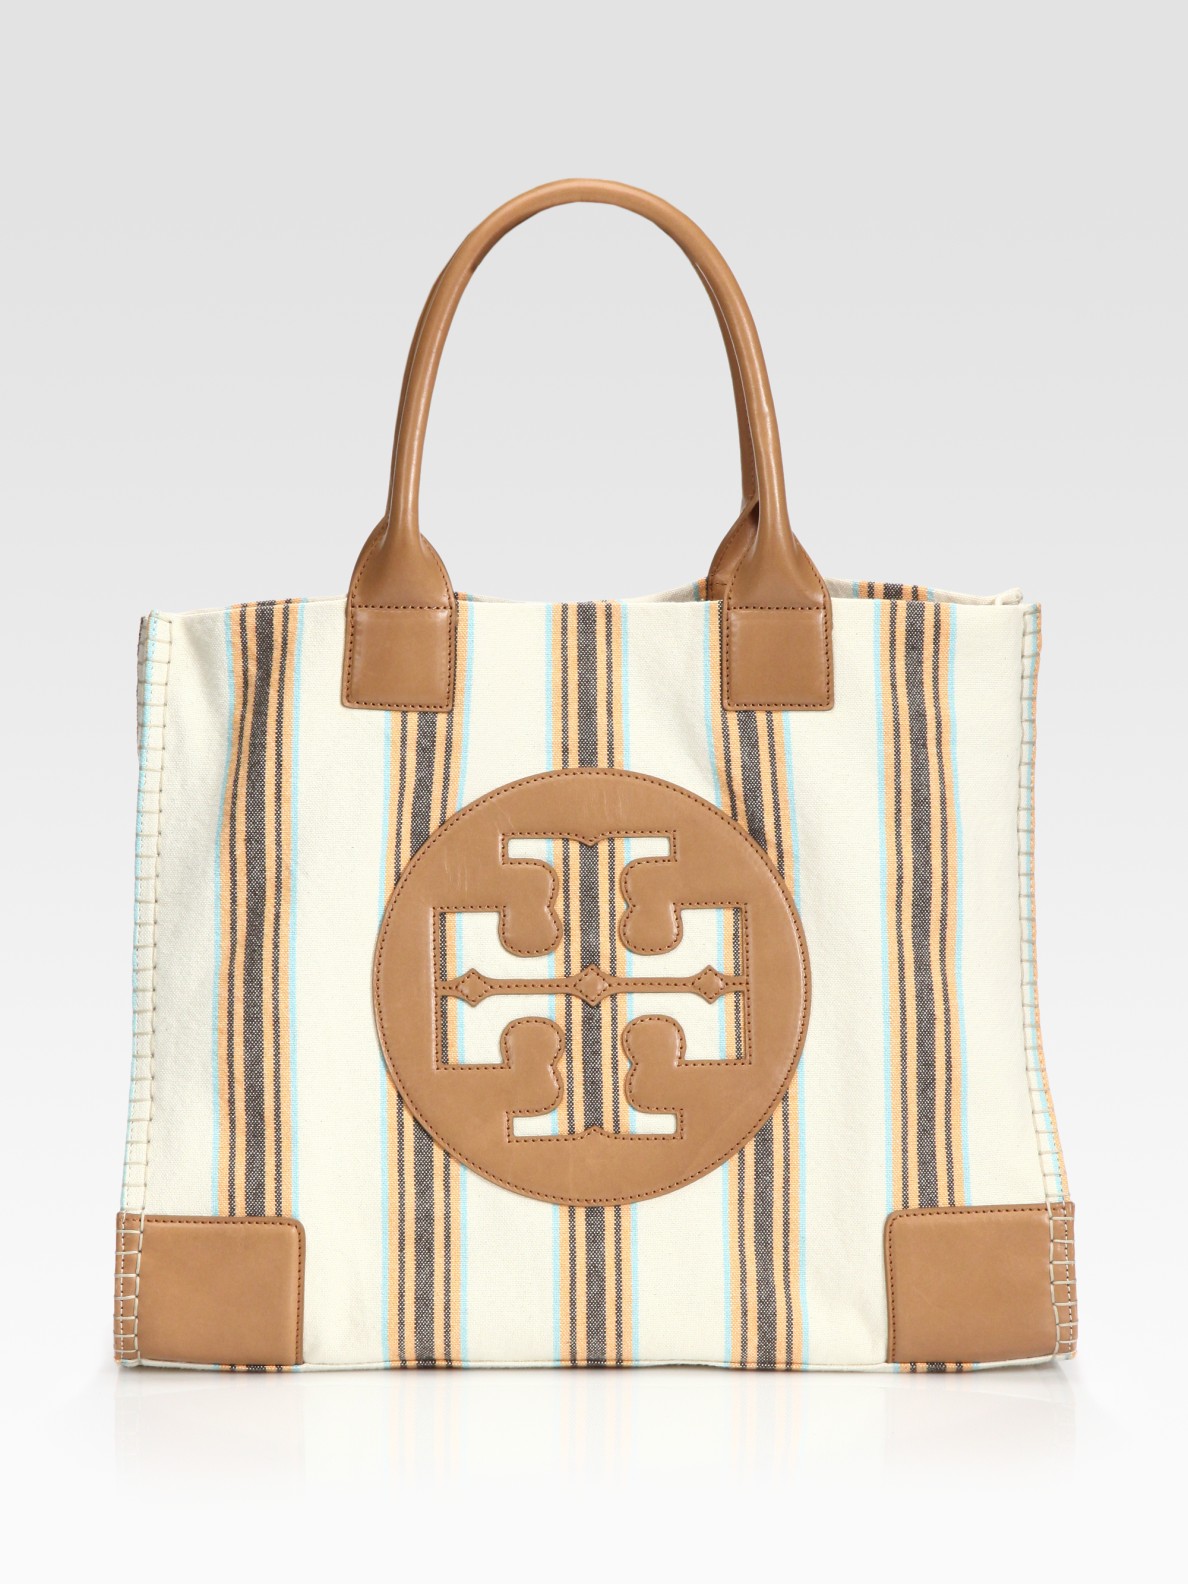 Tory burch Ella Canvas & Leather Tote Bag in Natural | Lyst